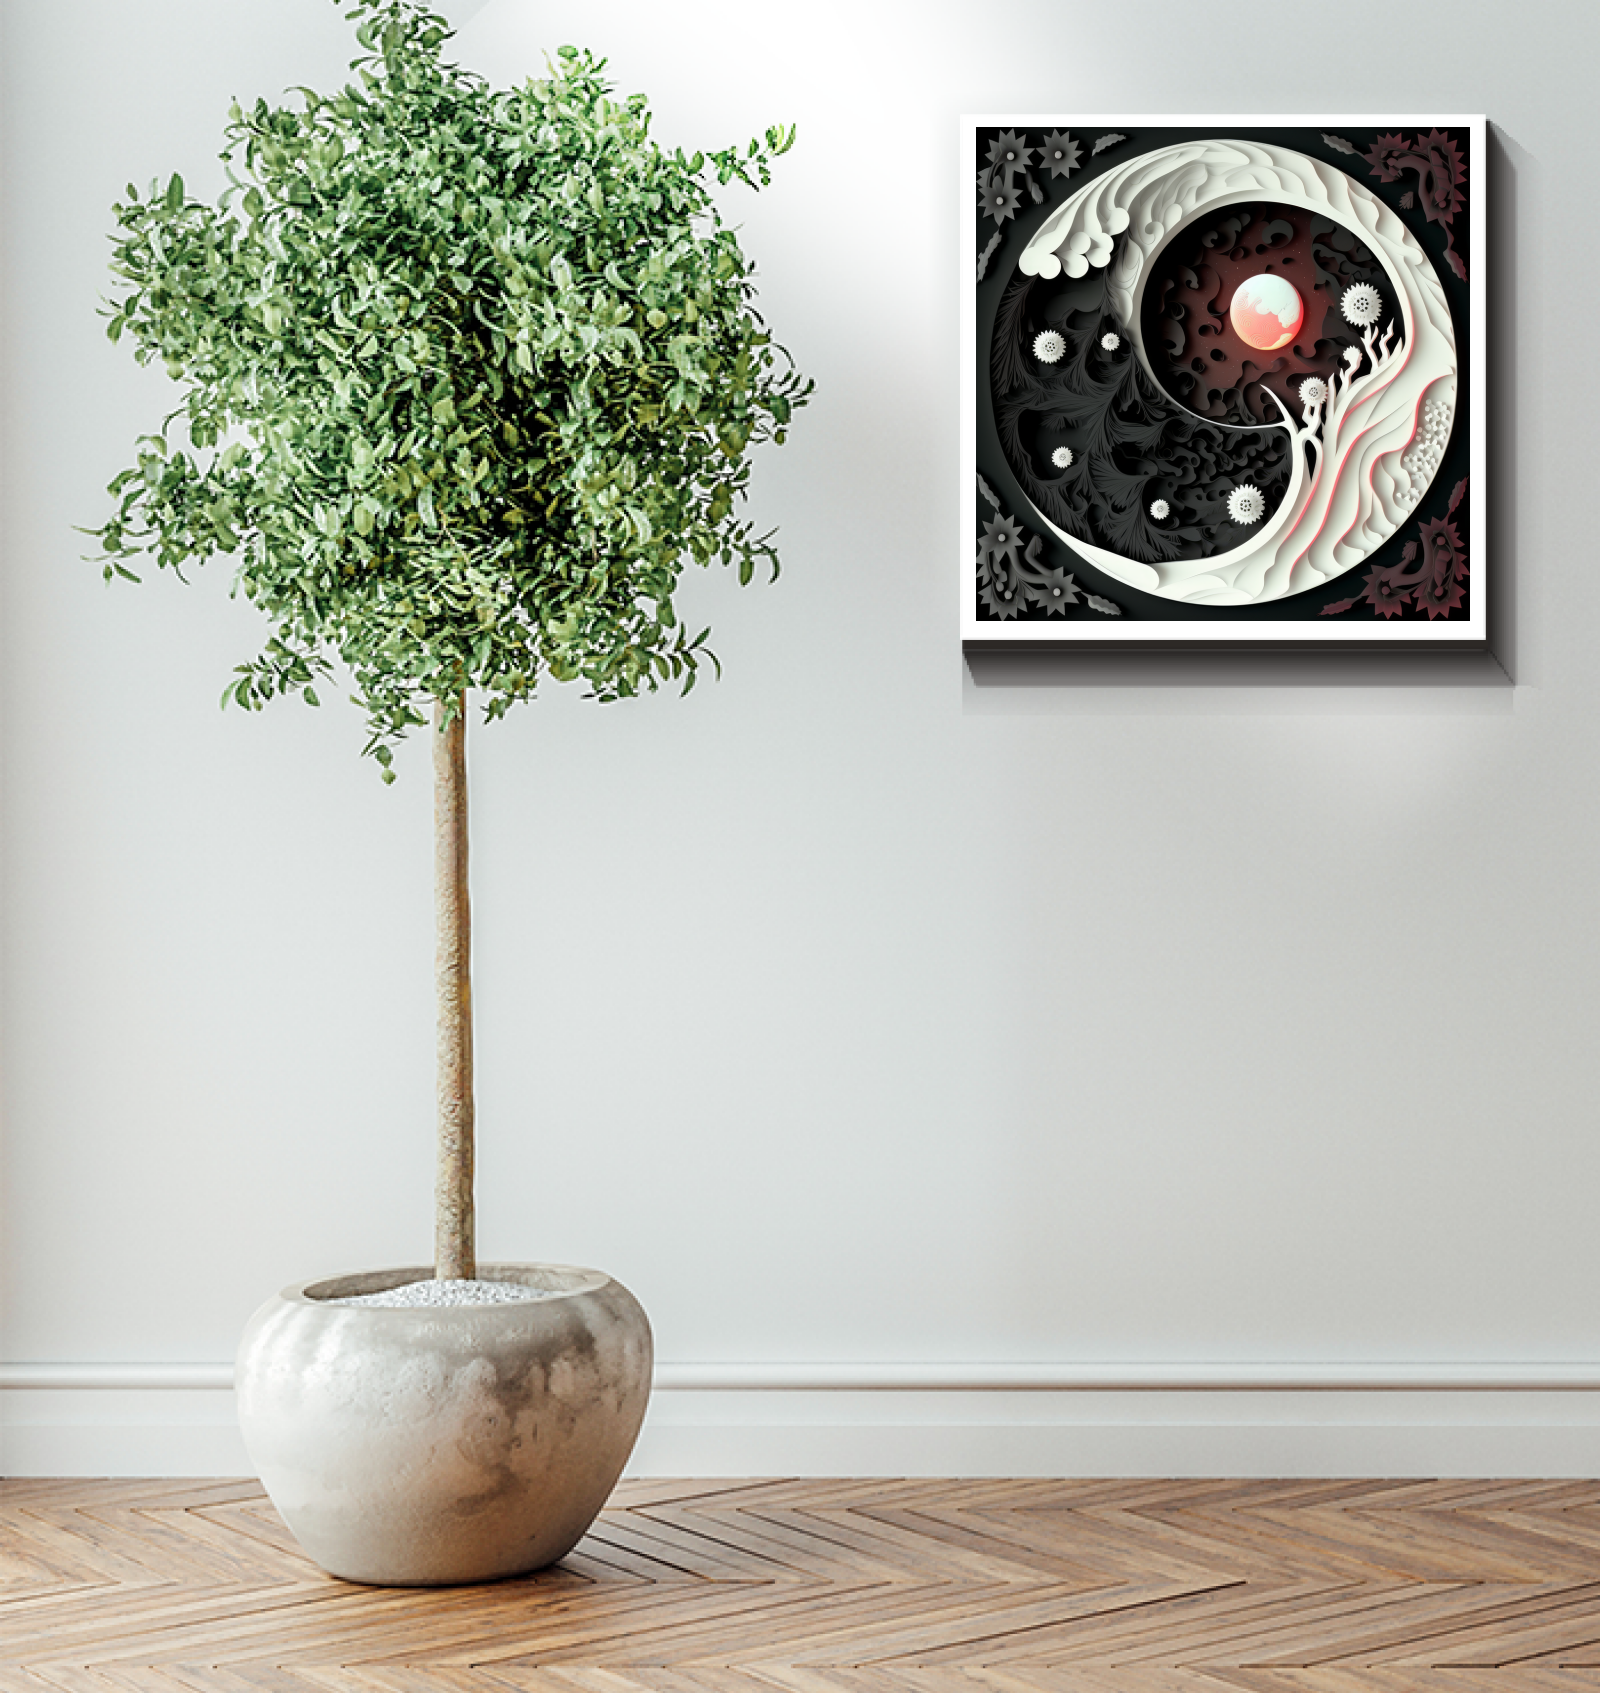 Canvas print featuring early stages of plant life.